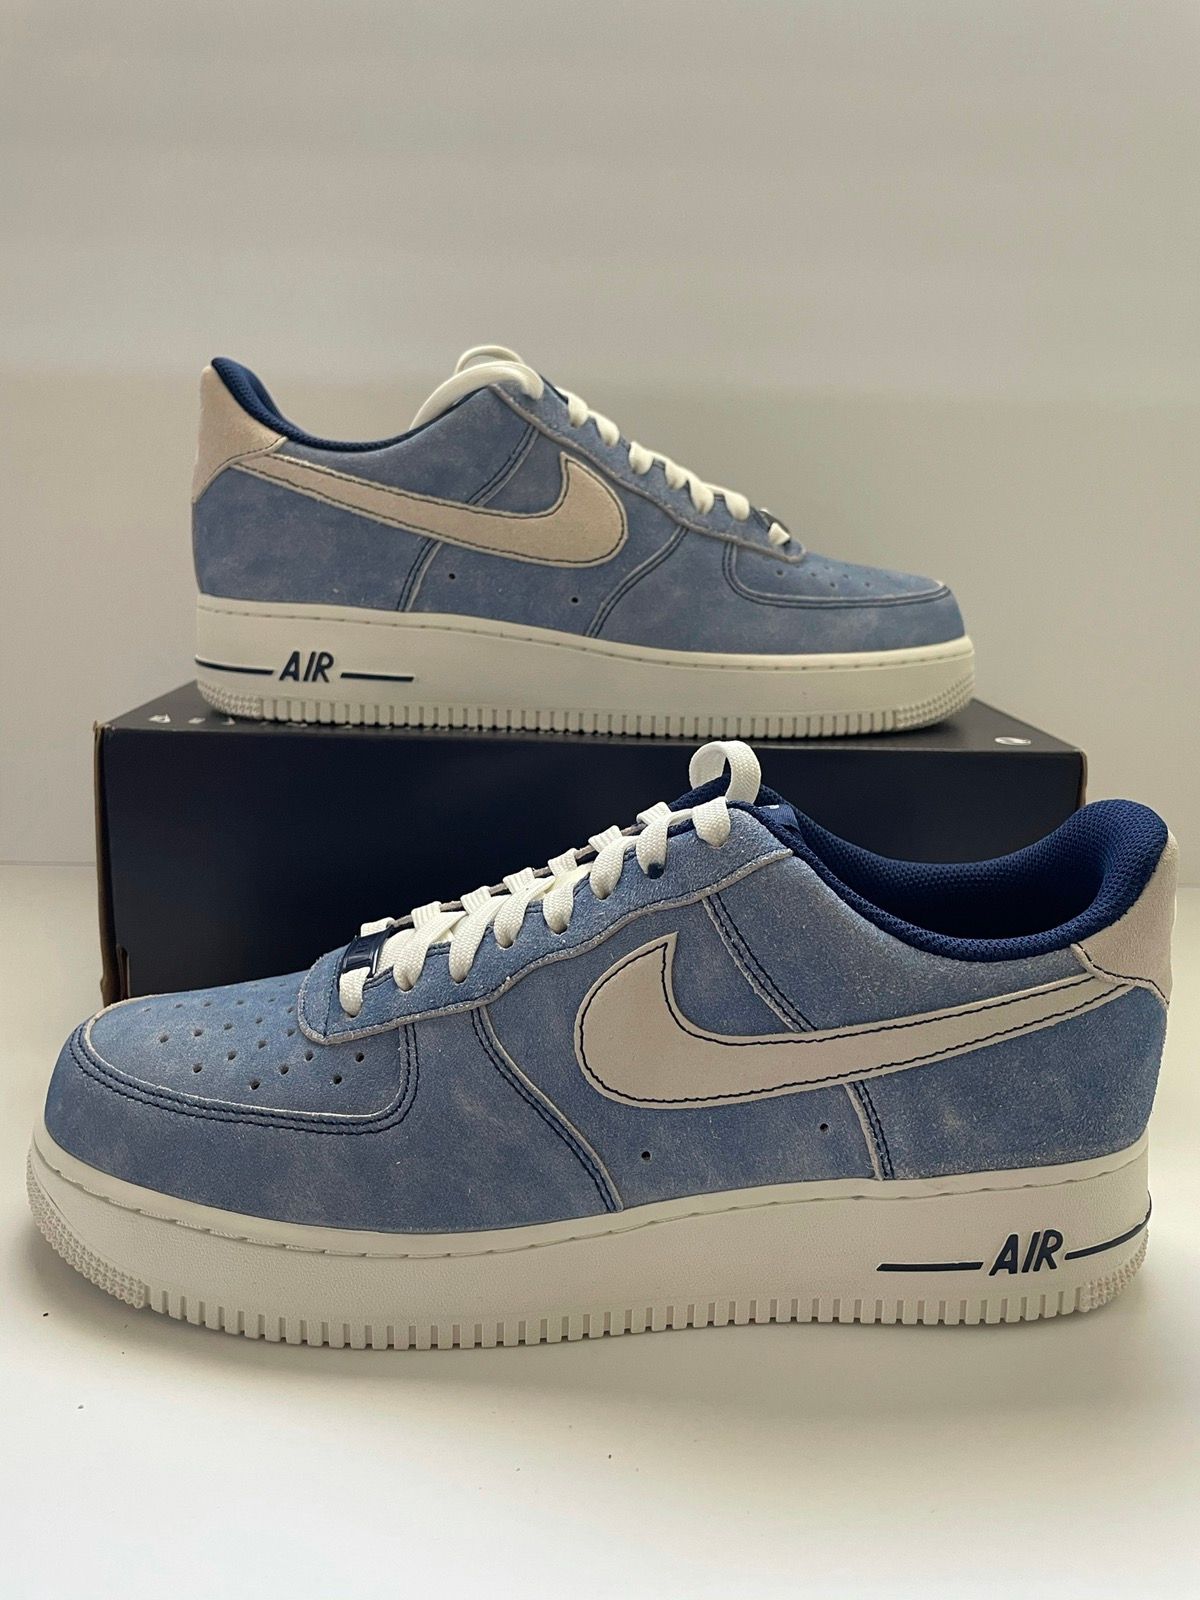 Nike Air Force 1 '07 LV8 Dusty Blue Void Sail Sz 11.5 DS Proof of